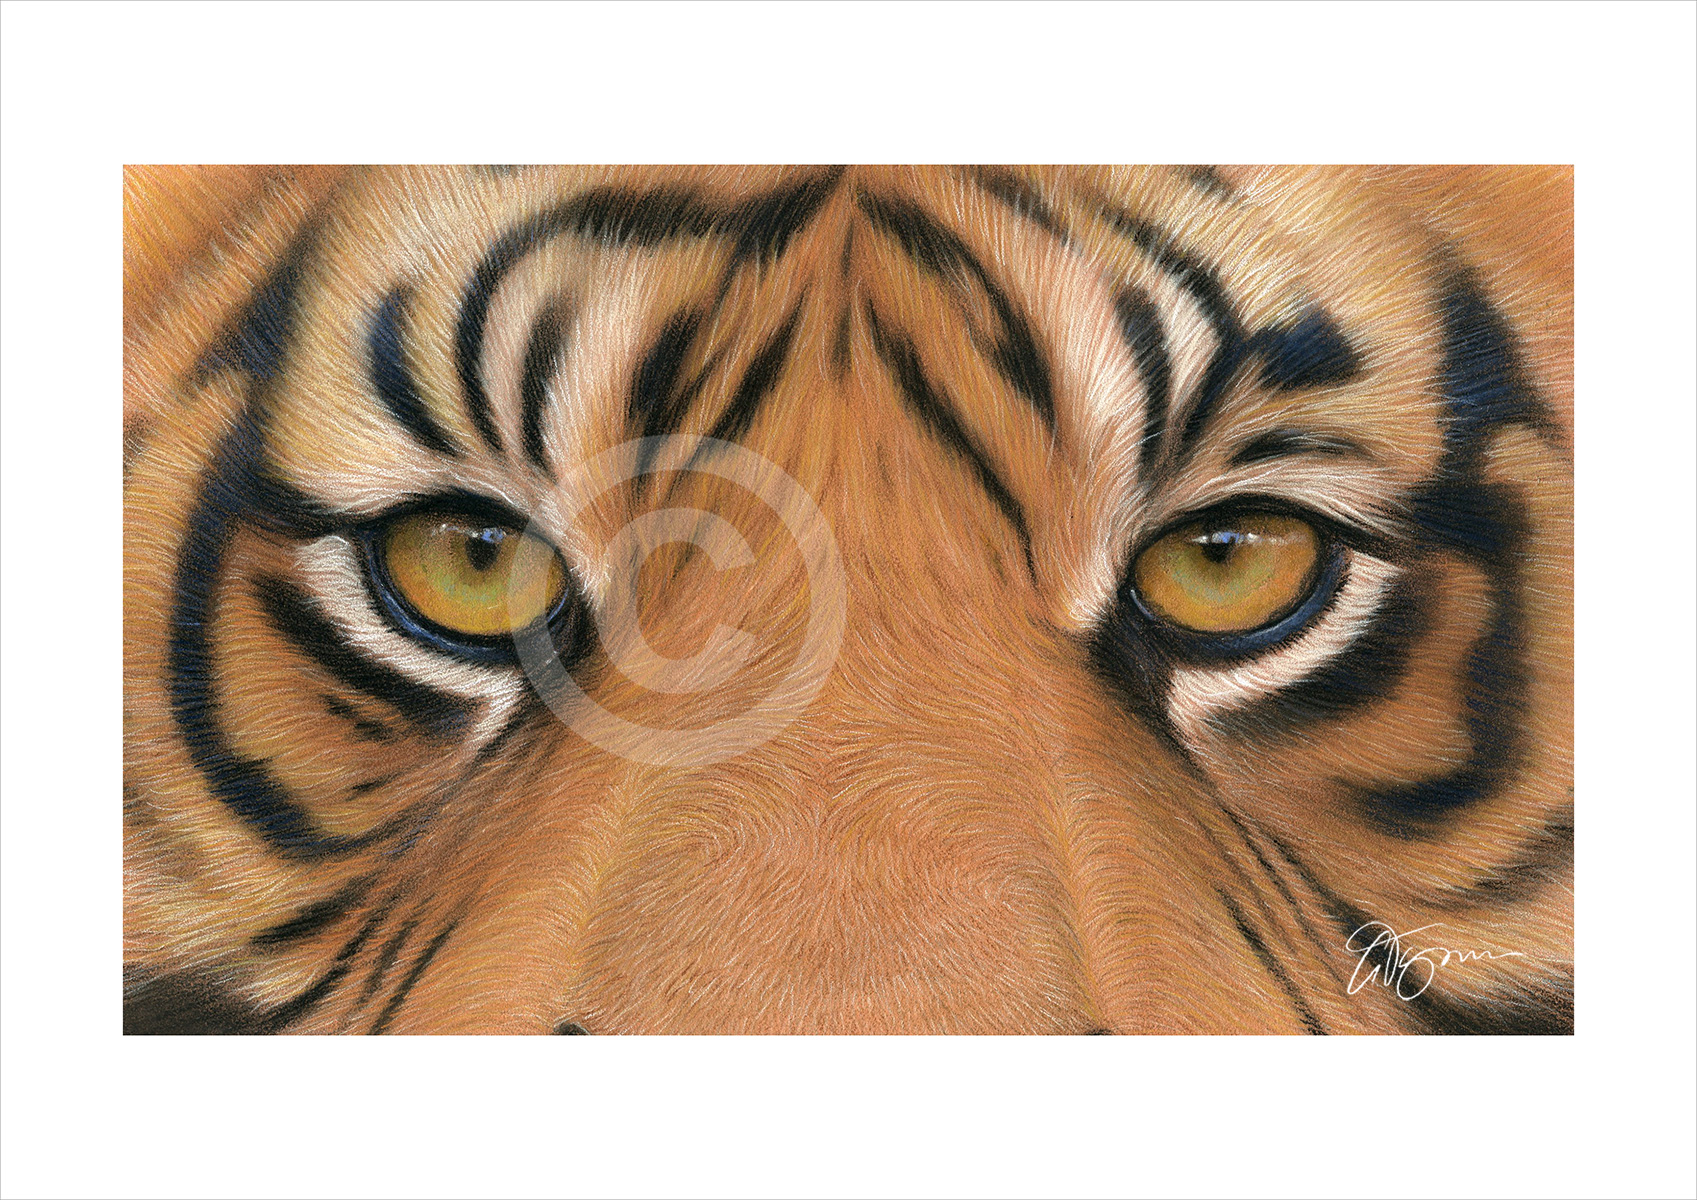 Colour pastel drawing of a Bengal Tiger's eyes by artist Gary Tymon